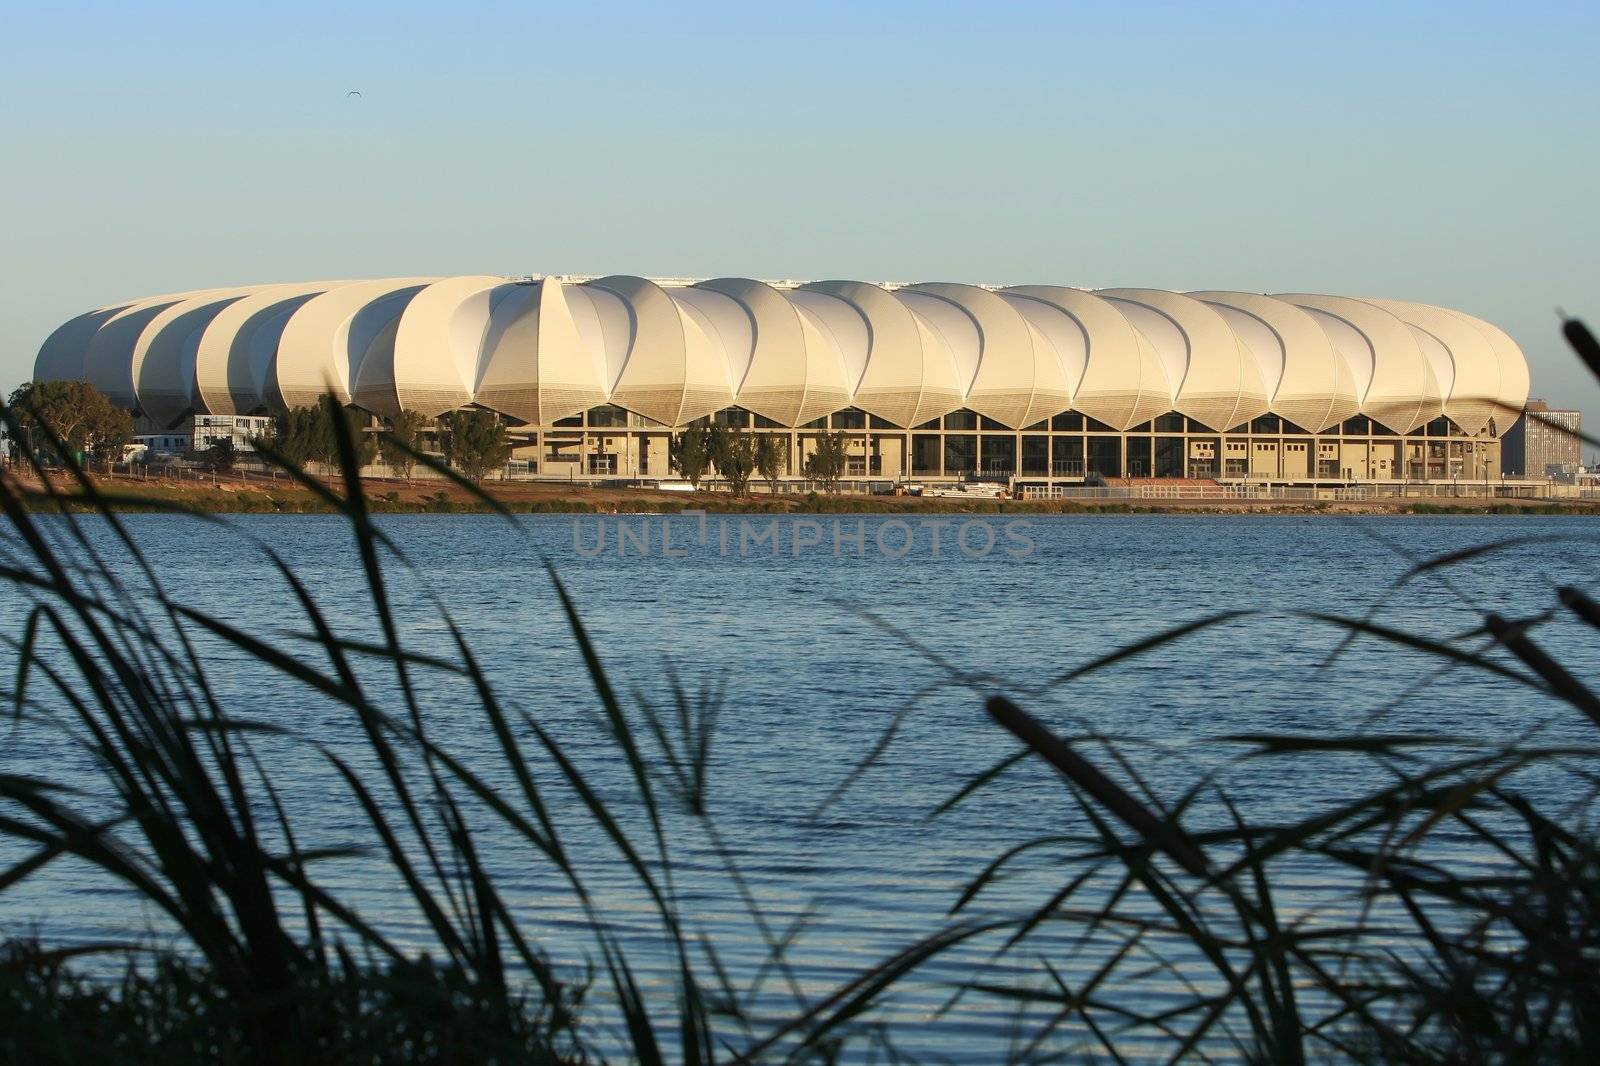 Soccer stadium for the world cup in Port Elizabeth, South Africa